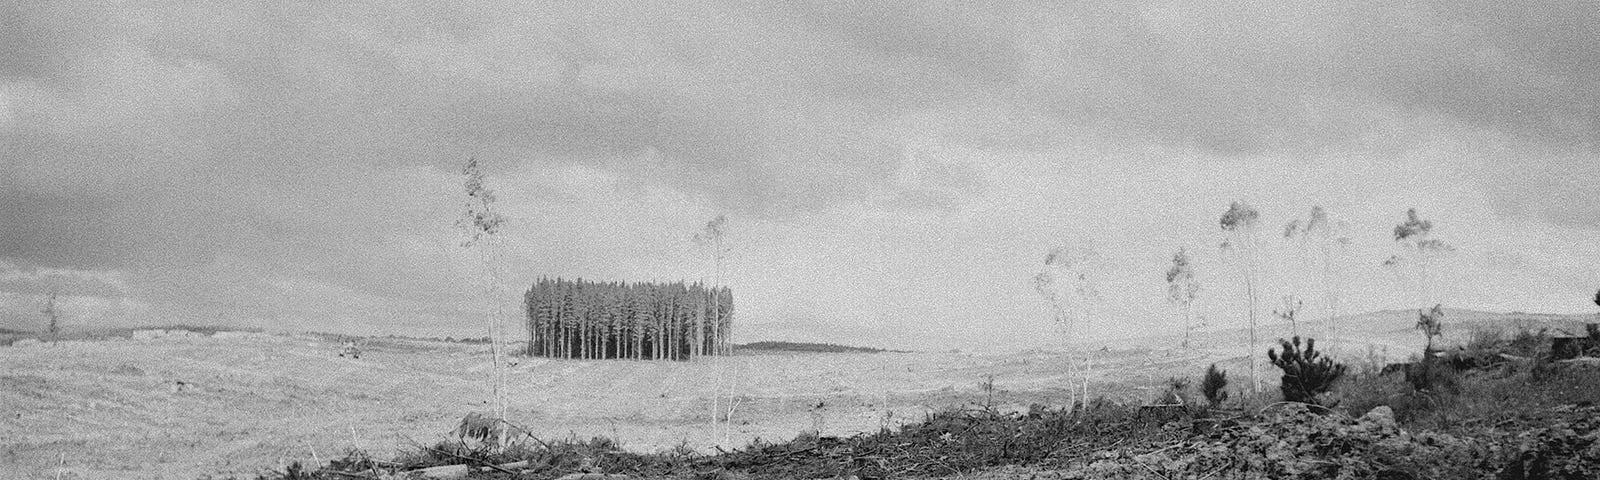 A black-and-white photograph of a timber plantation against an overcast sky. Most of the trees have been cut down. The remaining trees look small in this desolate landscape.